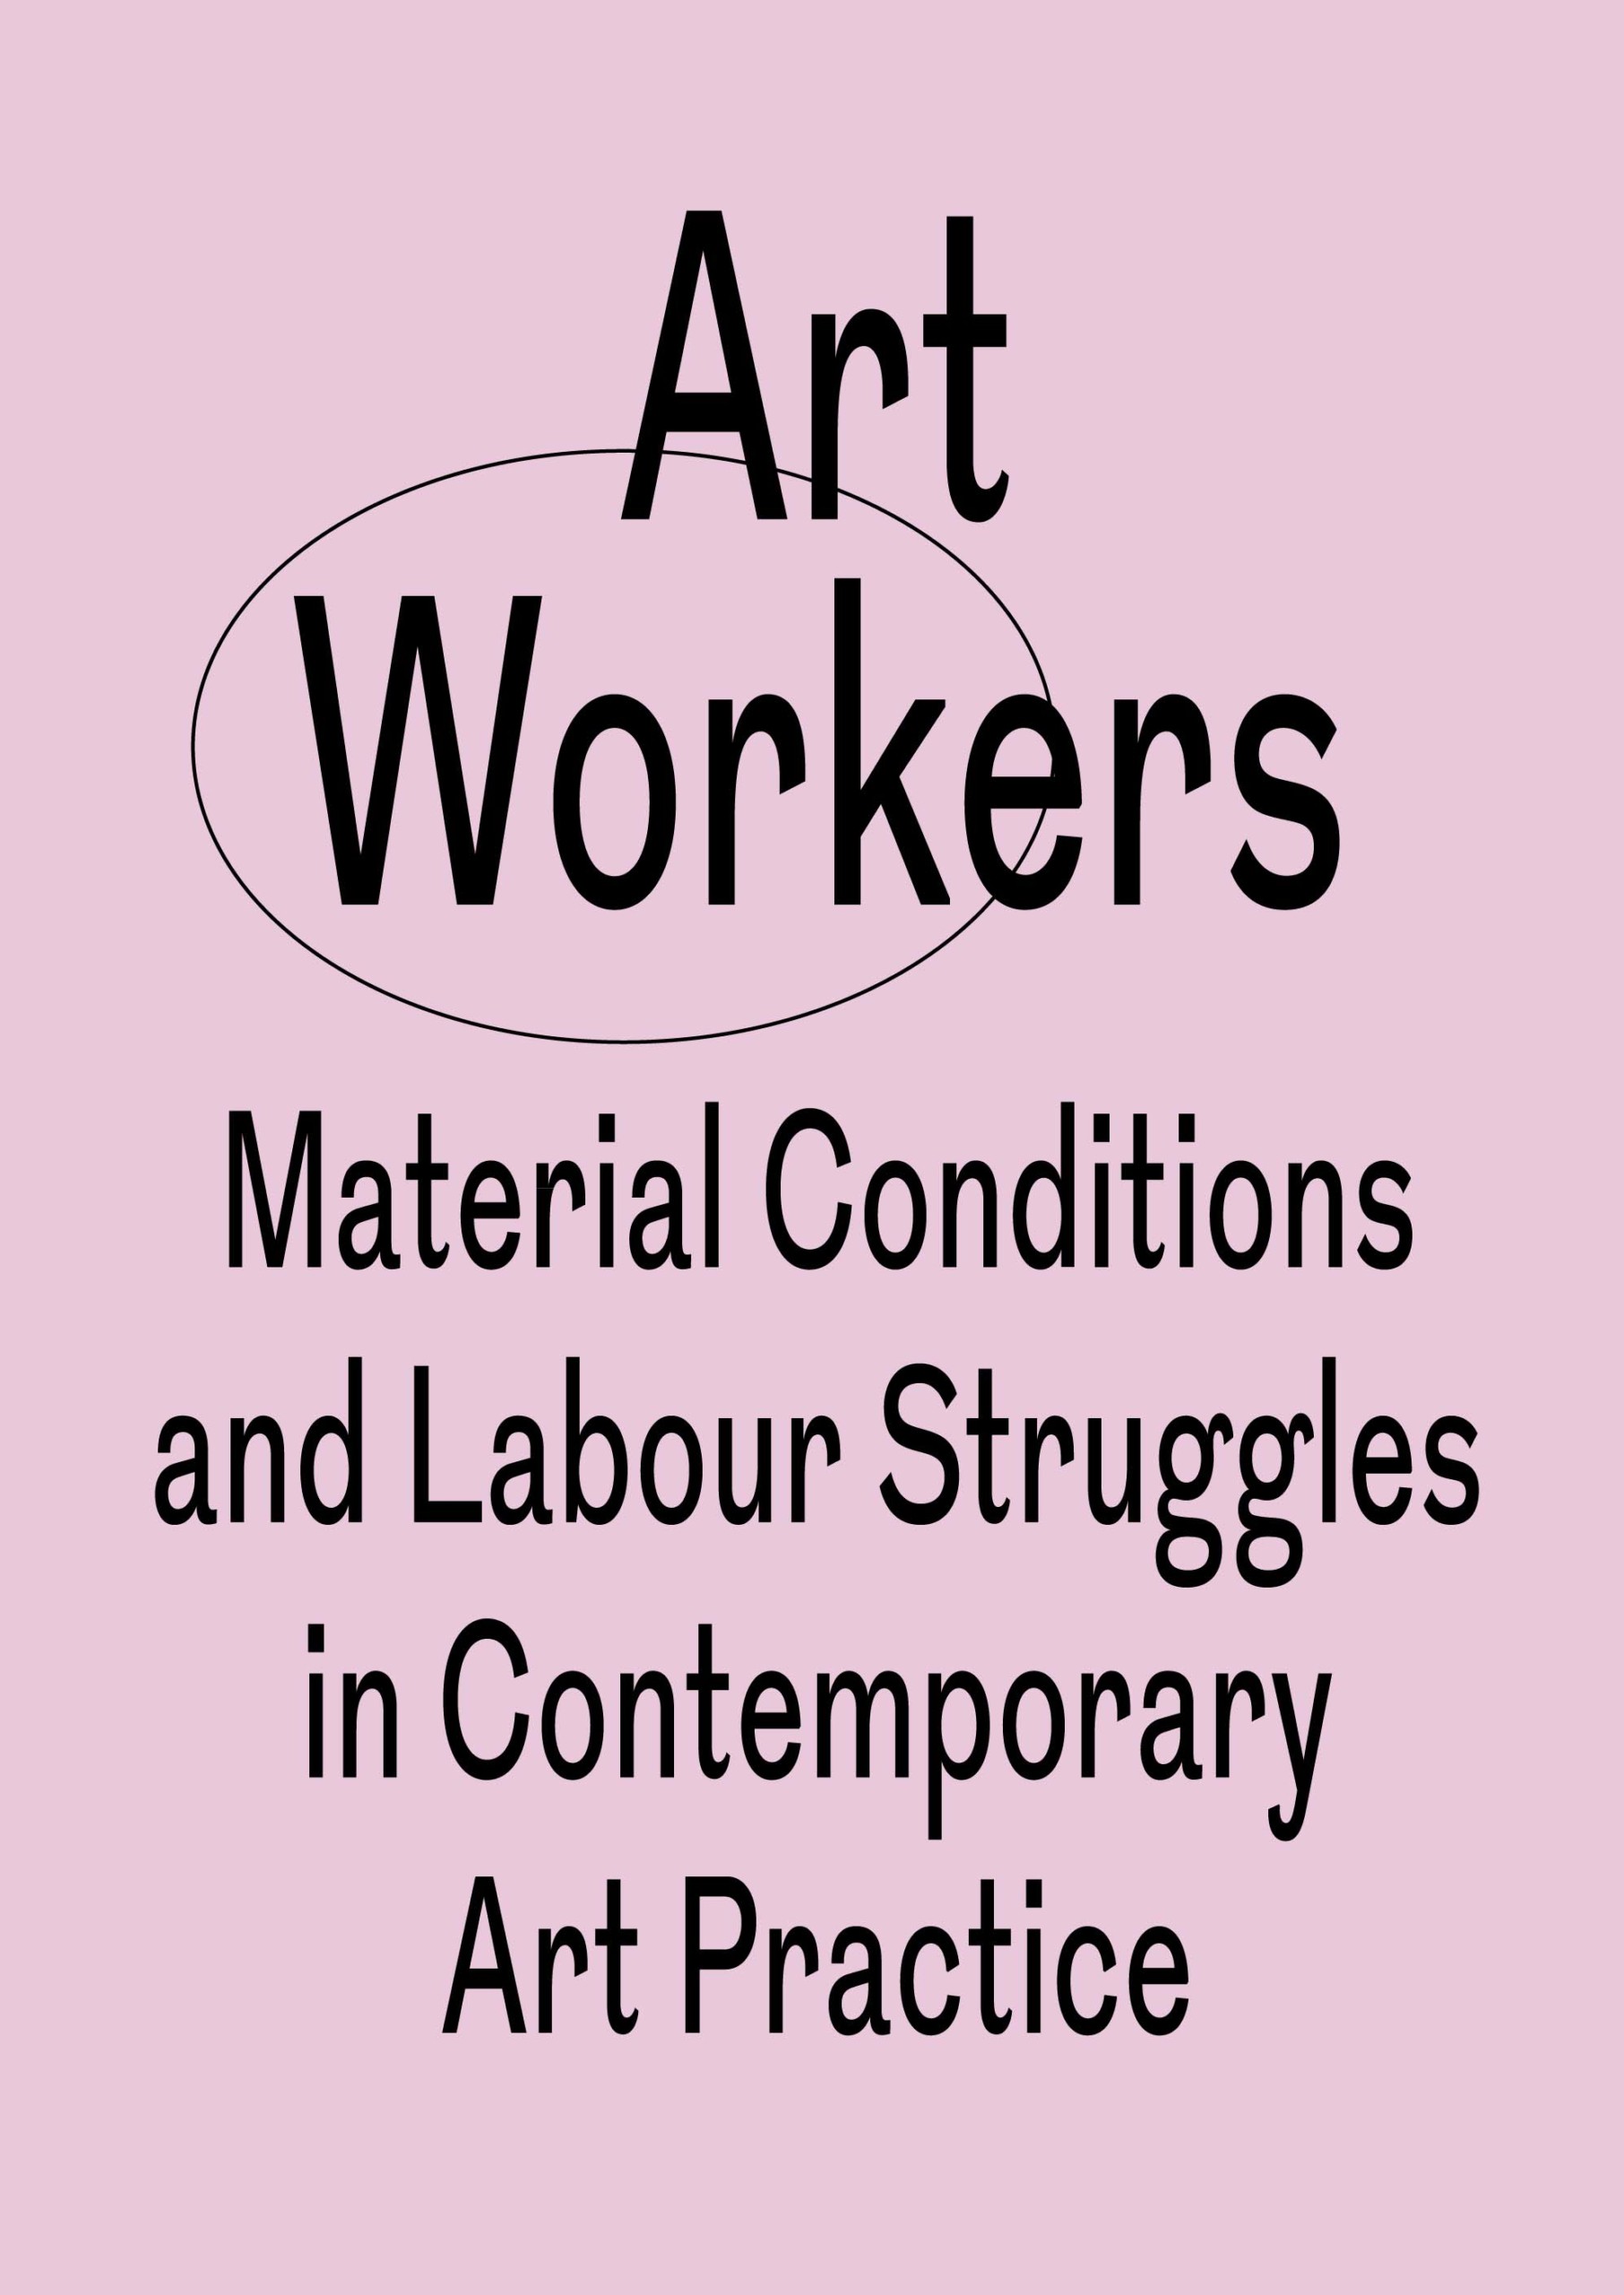 An image of a book cover. The text is black and the background light pink. The title of the book goes as following: Art Workers Material Conditions and Labour Struggles in Contemporary Art Practice.